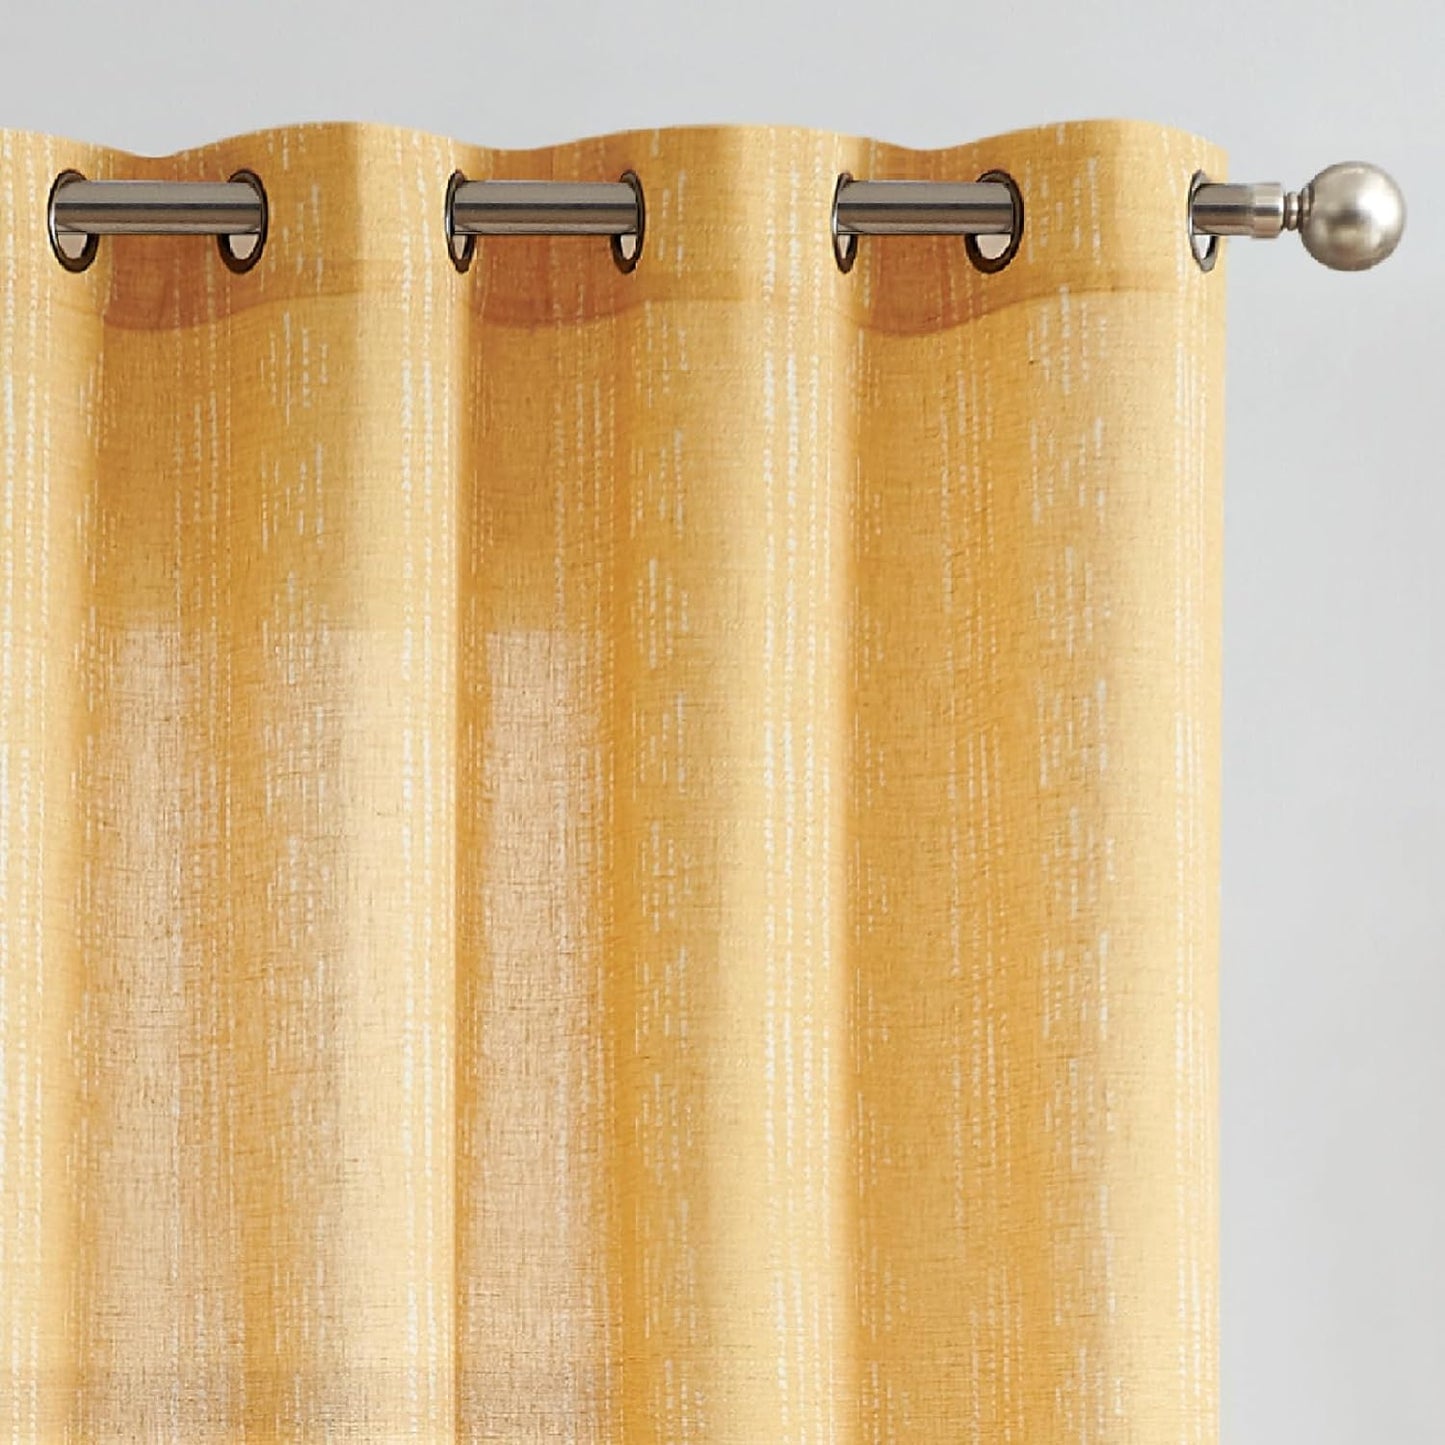 Jinchan Boho Curtains Linen Sliding Patio Door Curtains 84 Inches Long 1 Panel Divider Drapes Extra Wide Black Farmhouse Curtains for Living Room Geometric Striped Light Filtering Grommet Curtains  CKNY HOME FASHION Boho| Mustard Yellow W52 X L63 